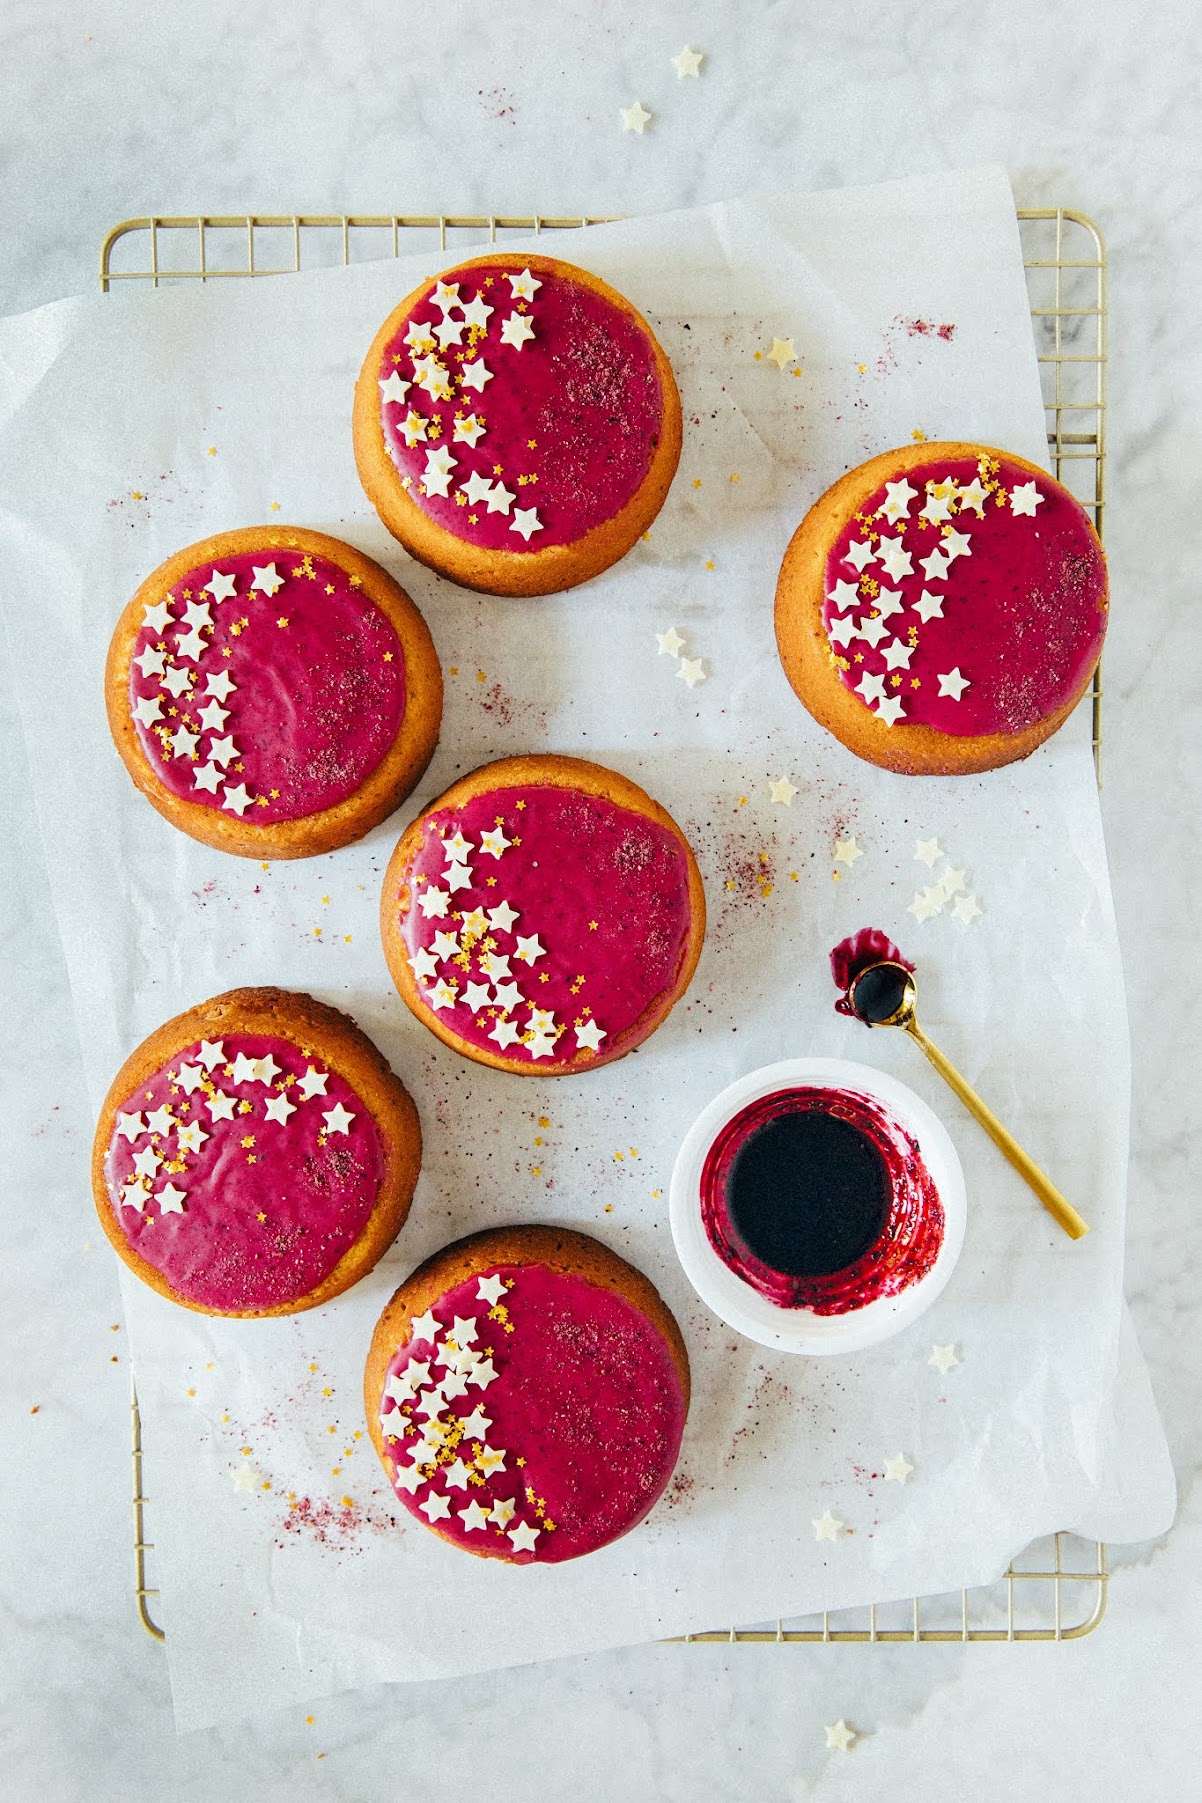 yuzu and blackcurrant cakelets